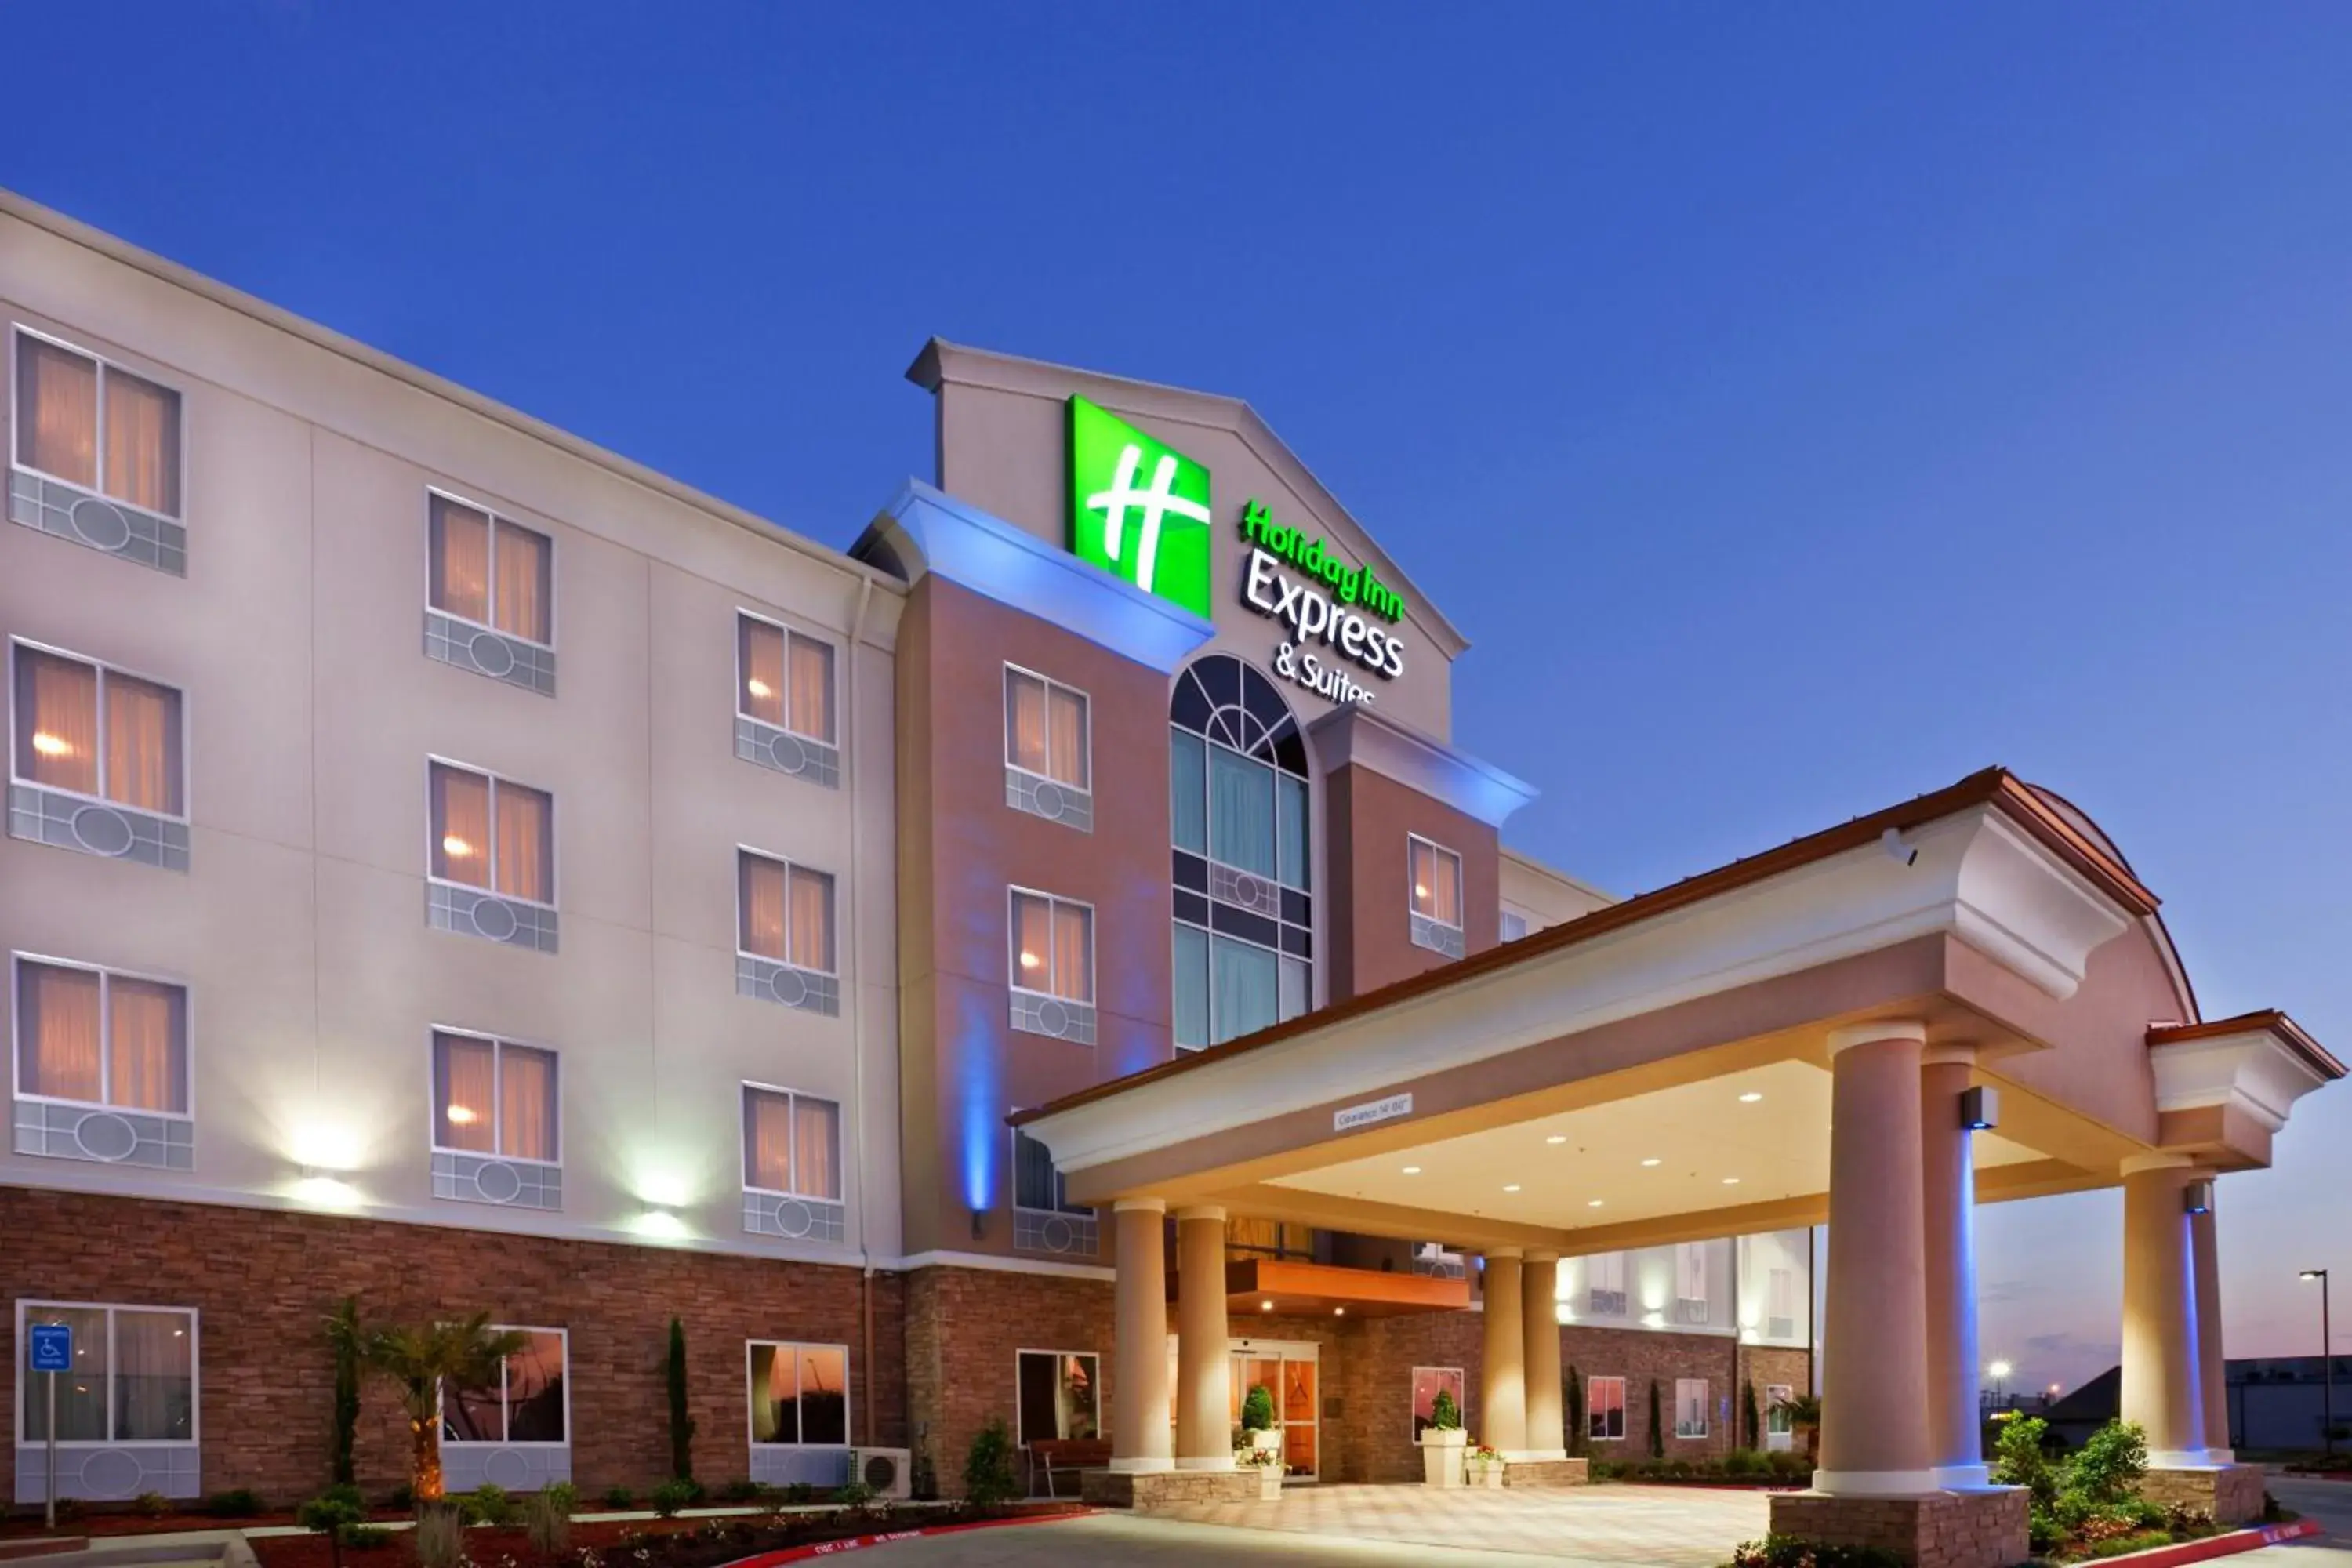 Property building in Holiday Inn Express Hotel & Suites Dallas West